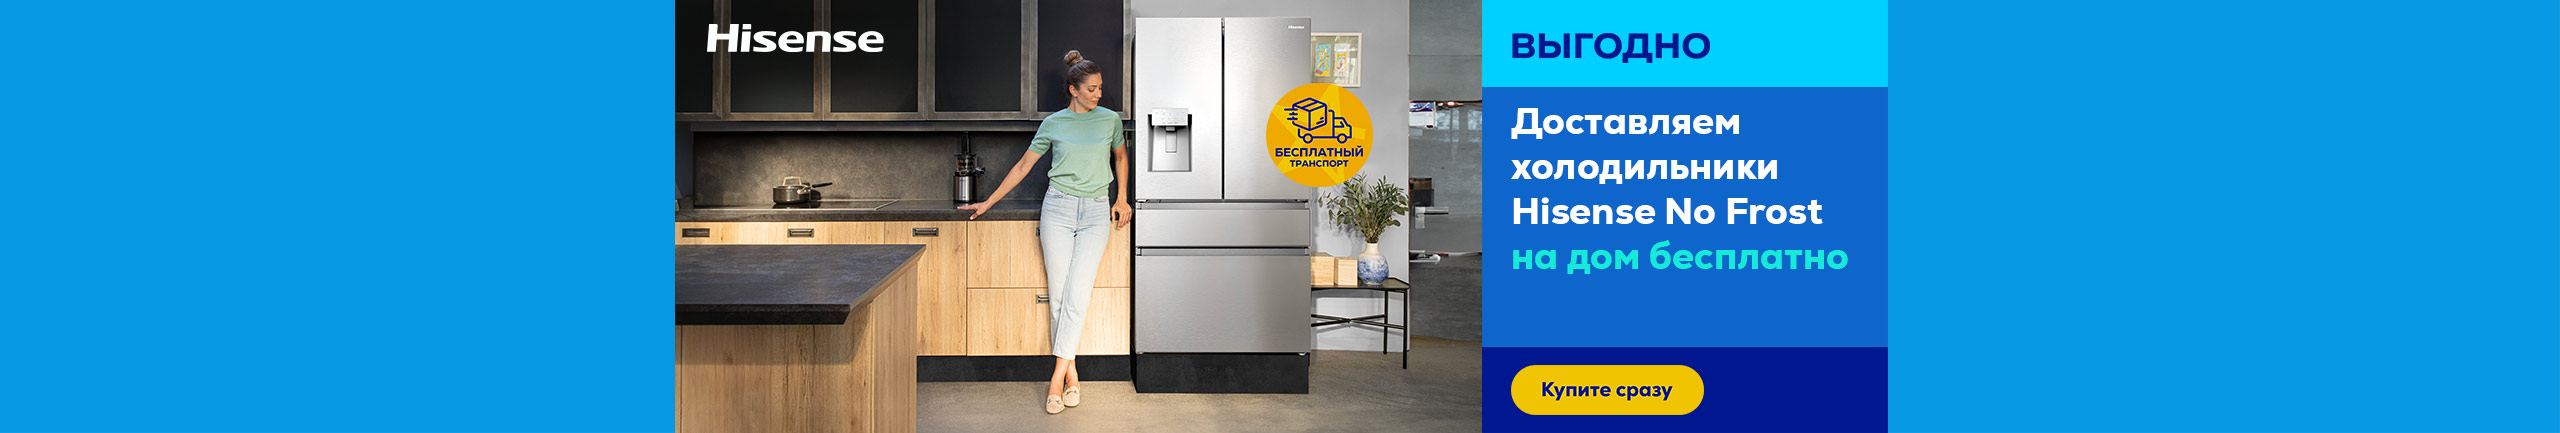 Free delivery of Hisense no frost refrigerators